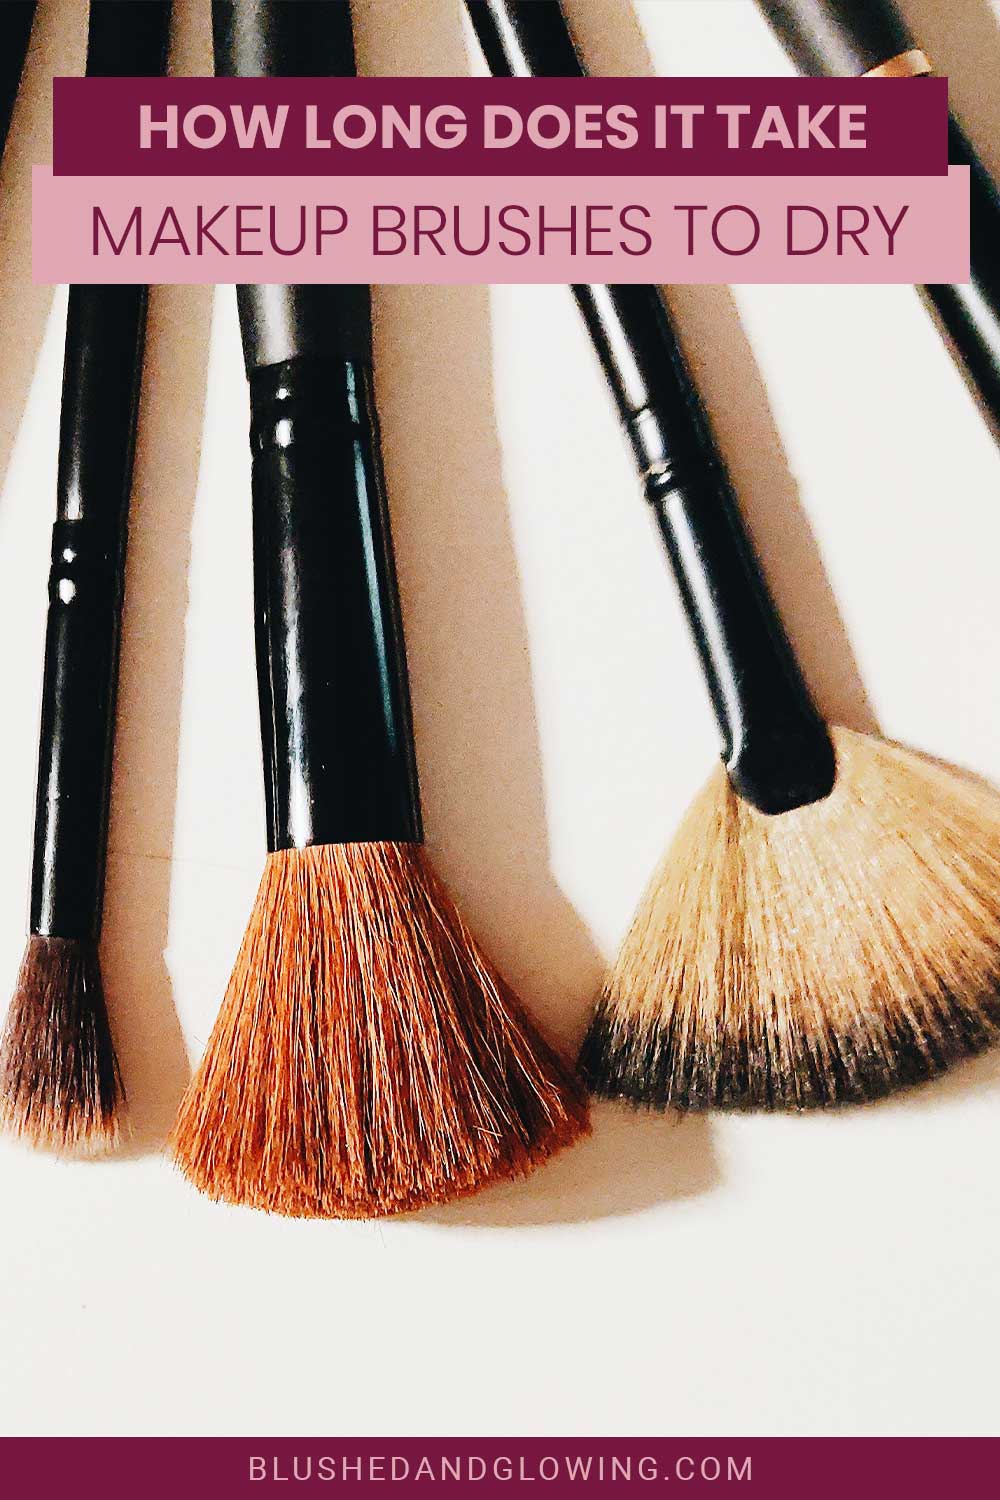 How Long Does It Take For Makeup Brushes To Dry? 